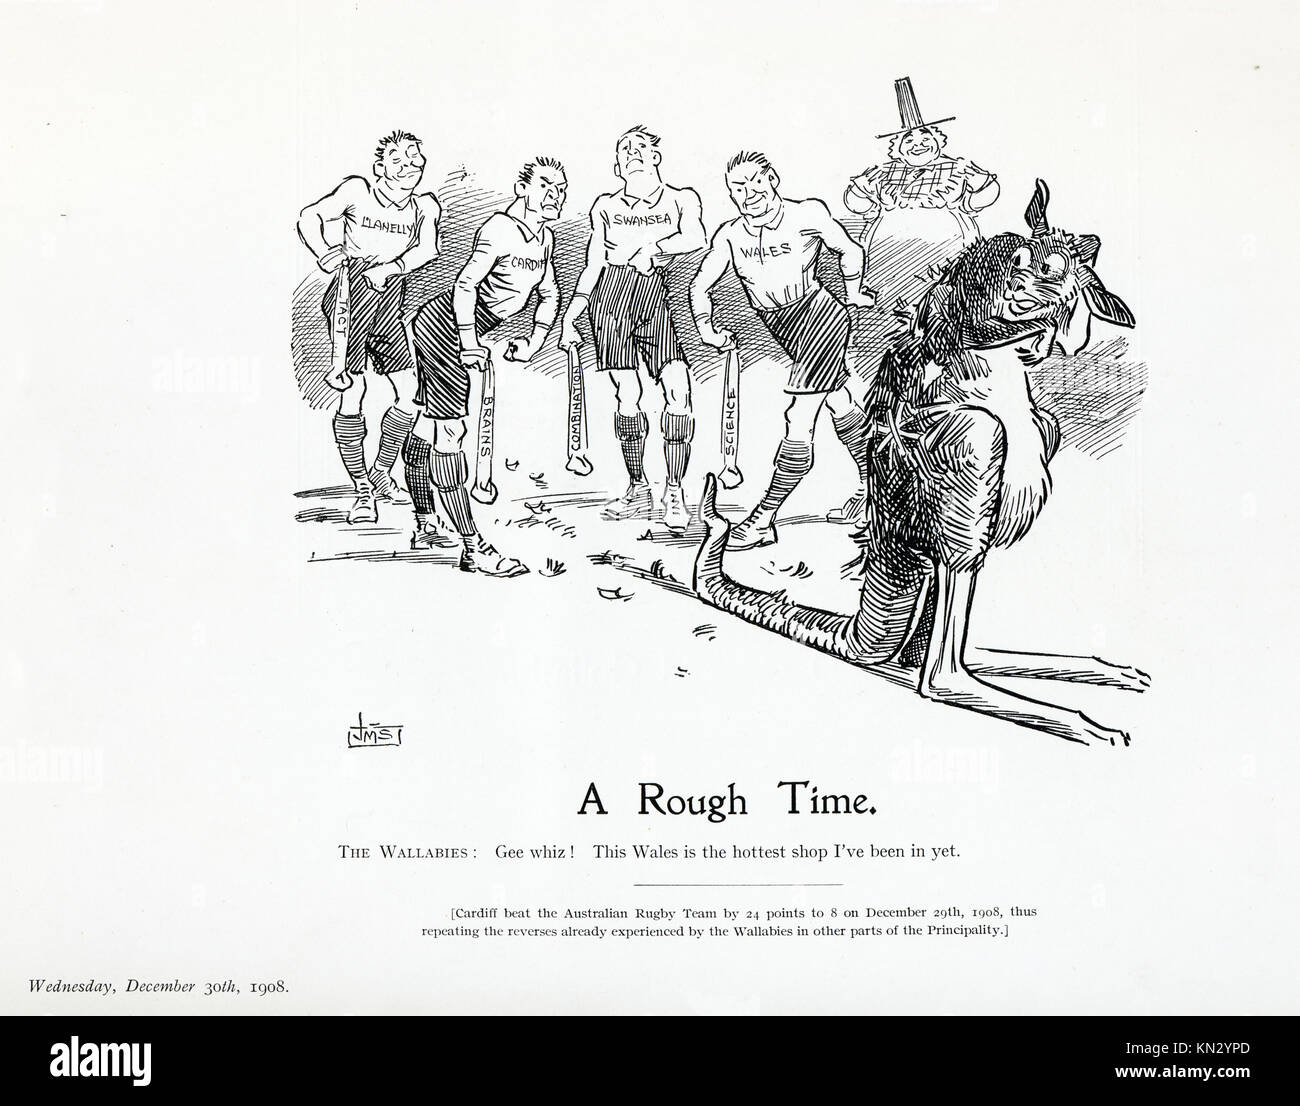 A Rough Time, 1908 cartoon by JM Staniforth on the First Wallaby Australian rugby touring side and their defeats in Wales by Llanelli, Swansea, the national side and finally by Cardiff Stock Photo